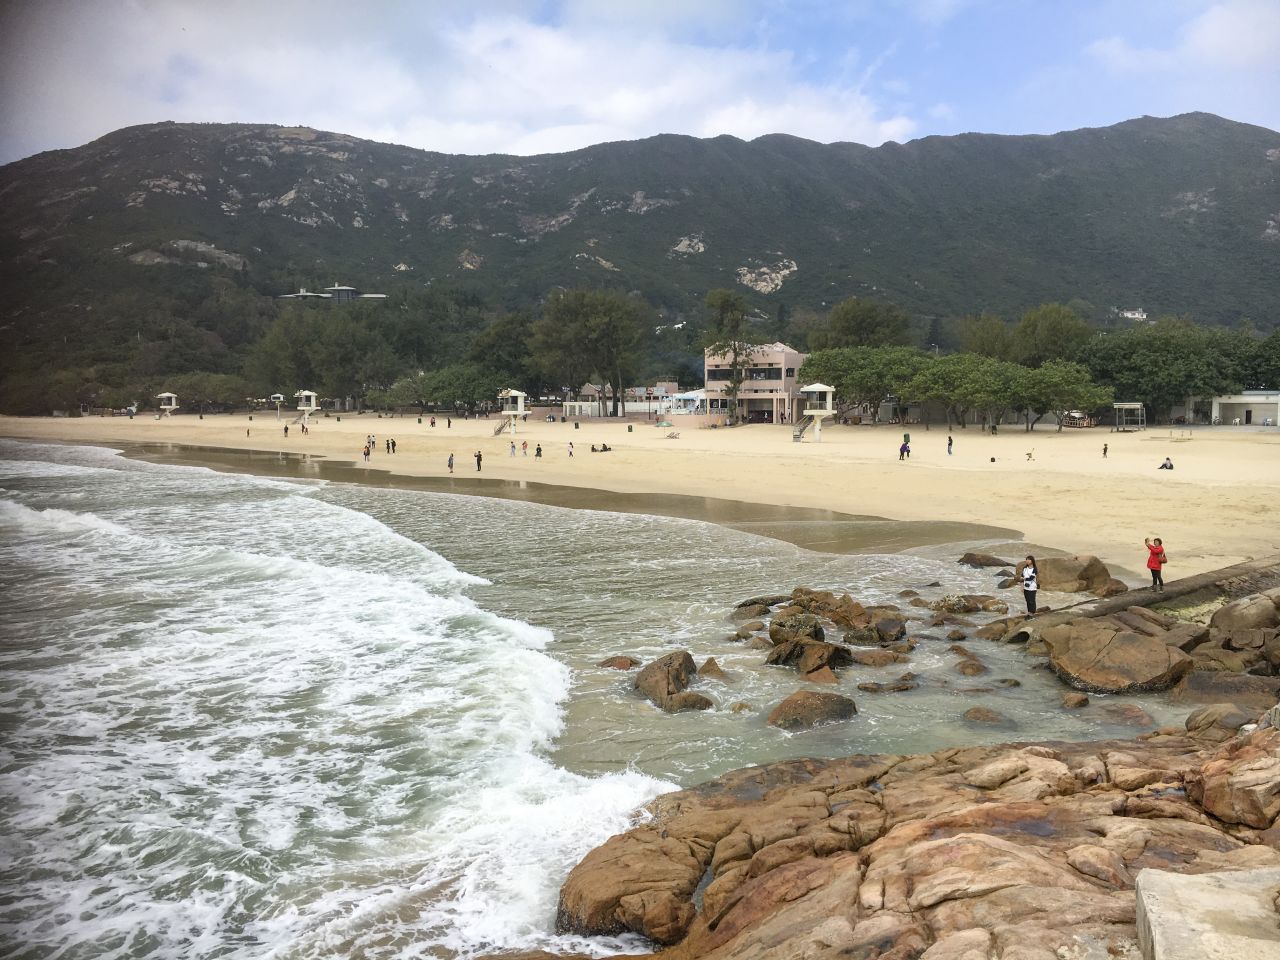 Within a short drive of the city center, there are mountains for hiking and beaches for swimming or surfing, providing locals with outdoor activities to keep fit. Pictured, Shek O beach in Hong Kong.